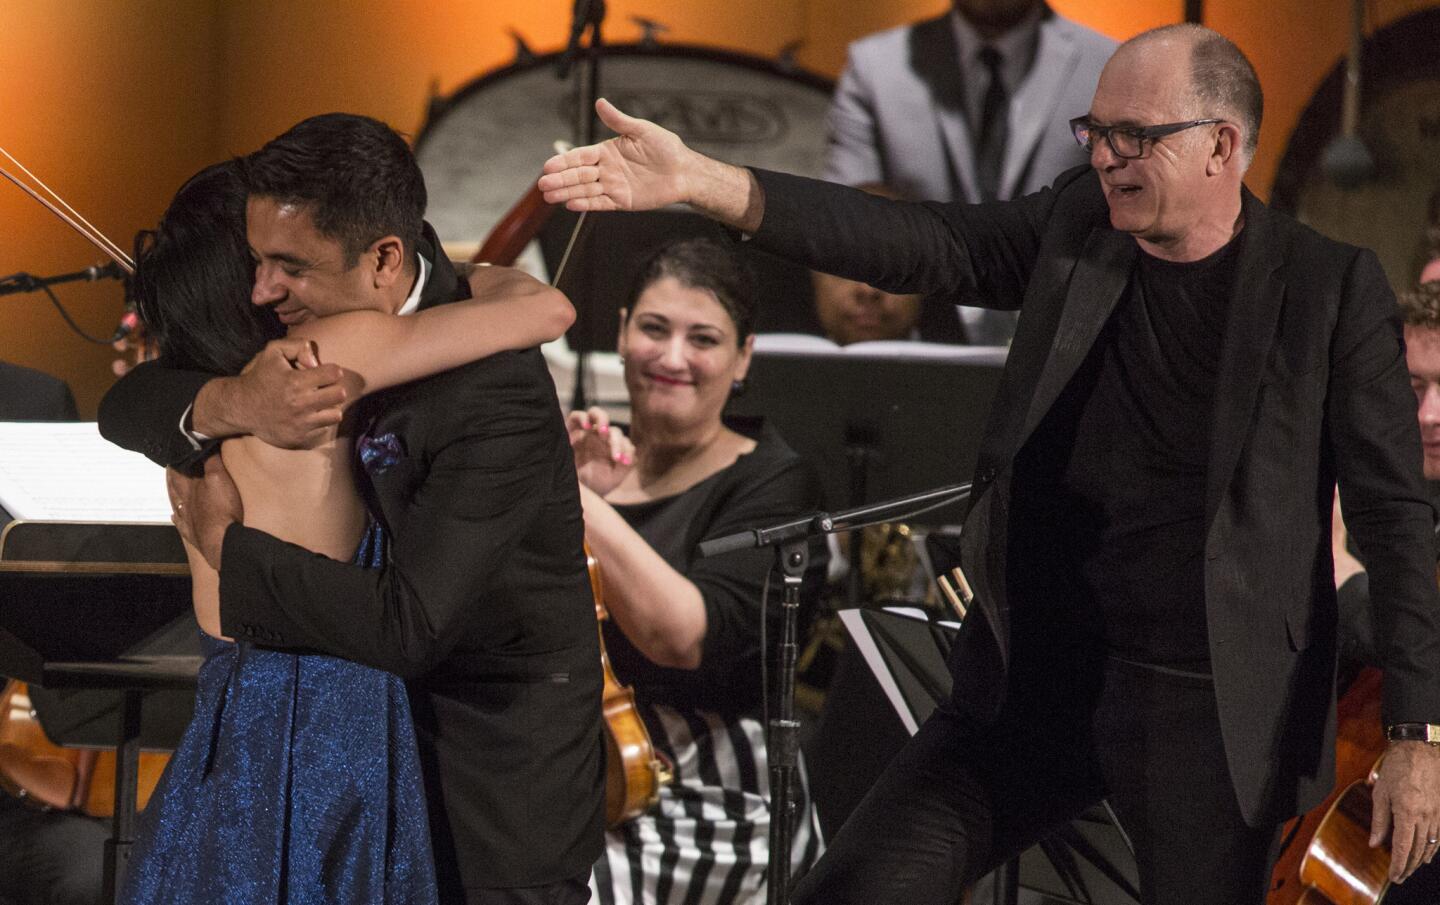 Conductor Steven Schick acknowledges Vijay Iyer as he hugs violinist Jennifer Koh after performance of Iyer's "Trouble" at the Ojai Music Festival's opening night June 8, 2017.